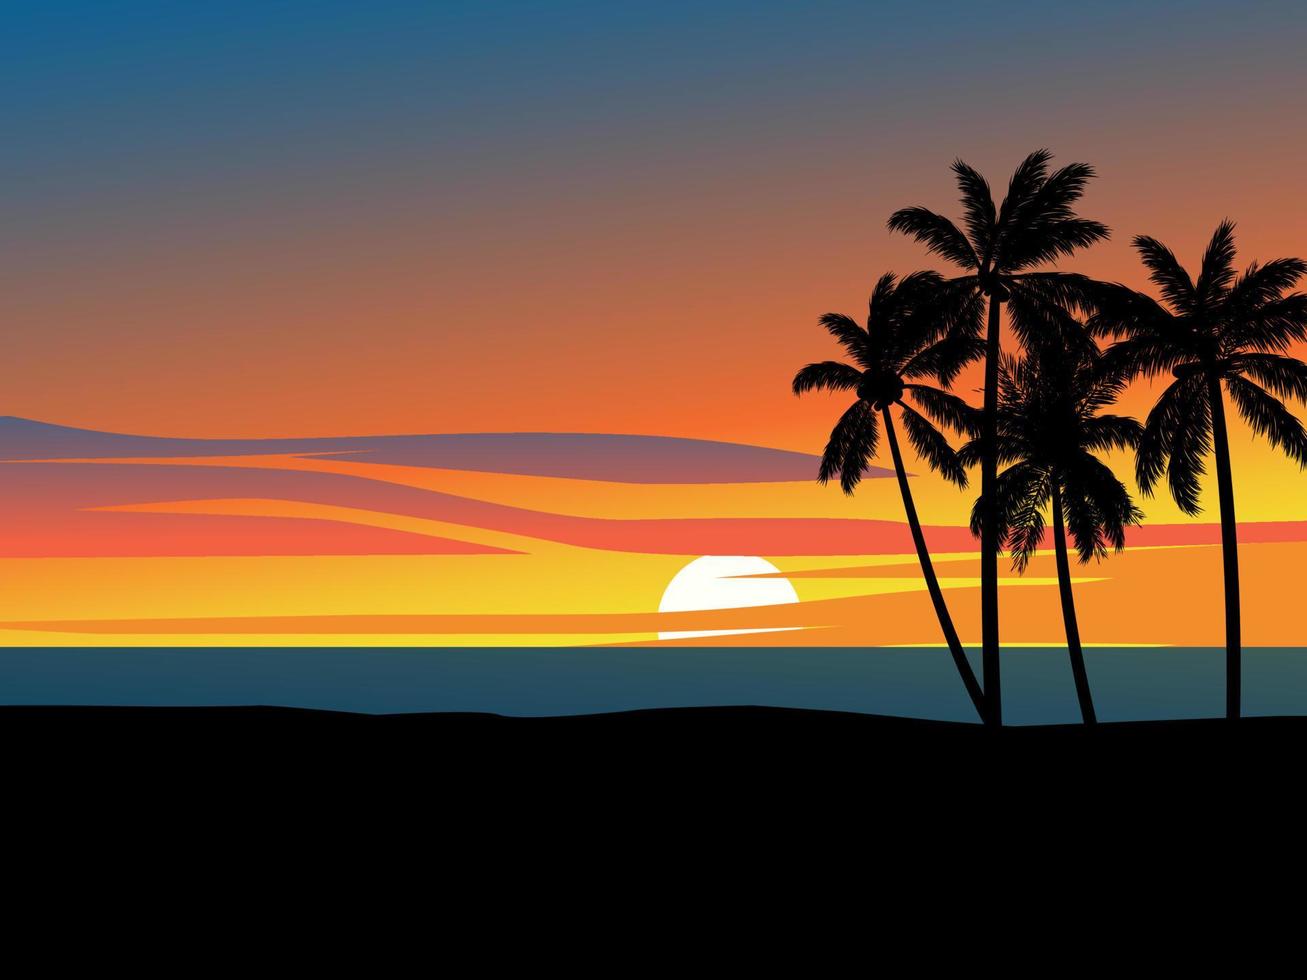 View of beach at sunset with palm trees in silhouette vector